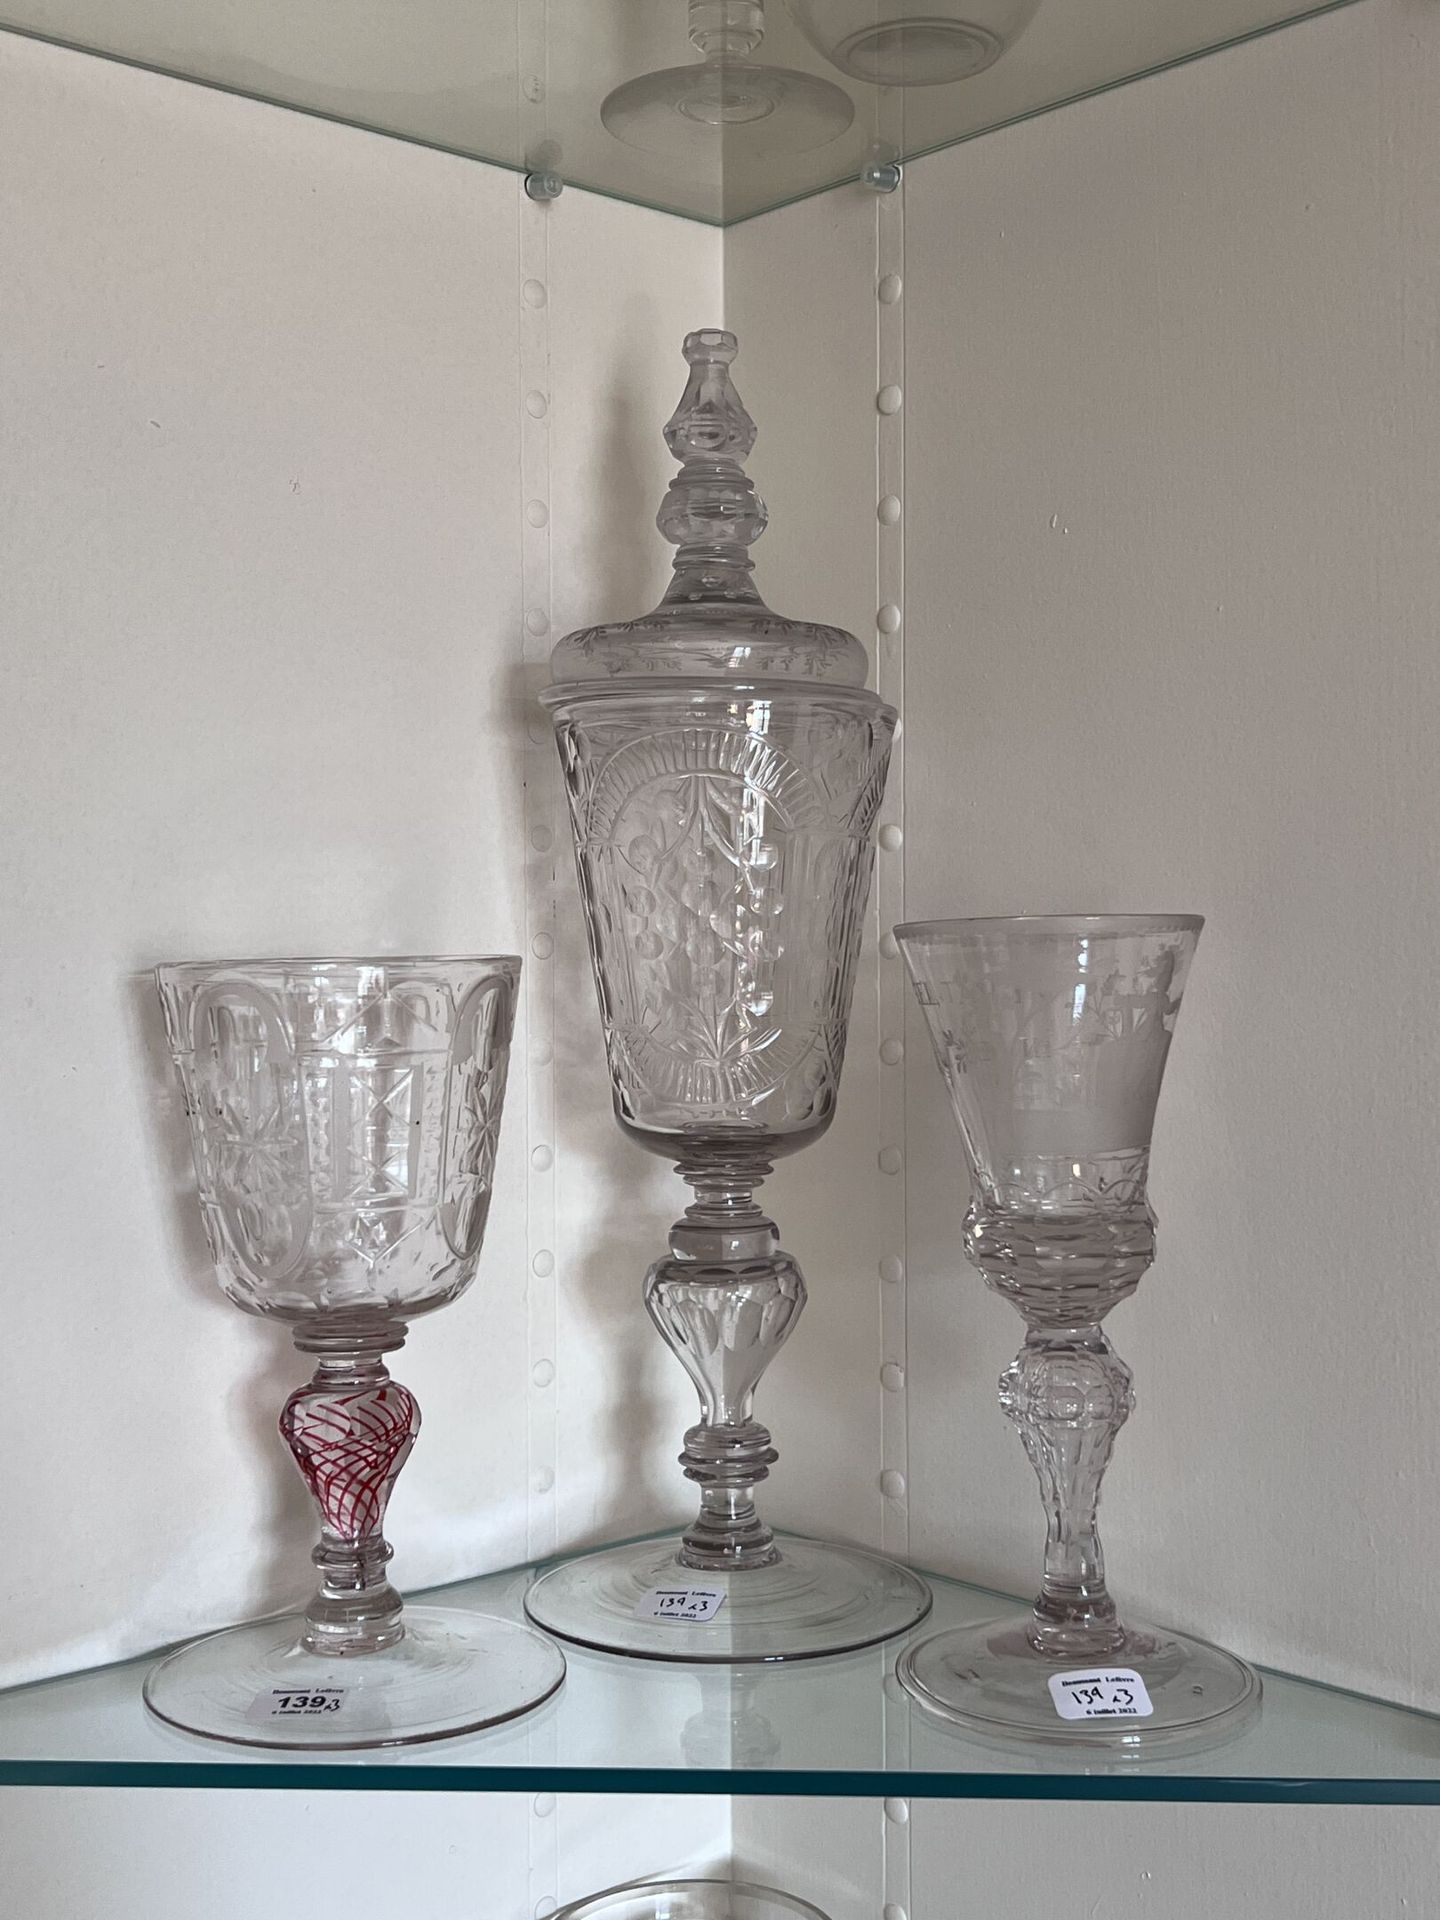 Null Pokal and two leg glasses in cut glass (from the 18th century)